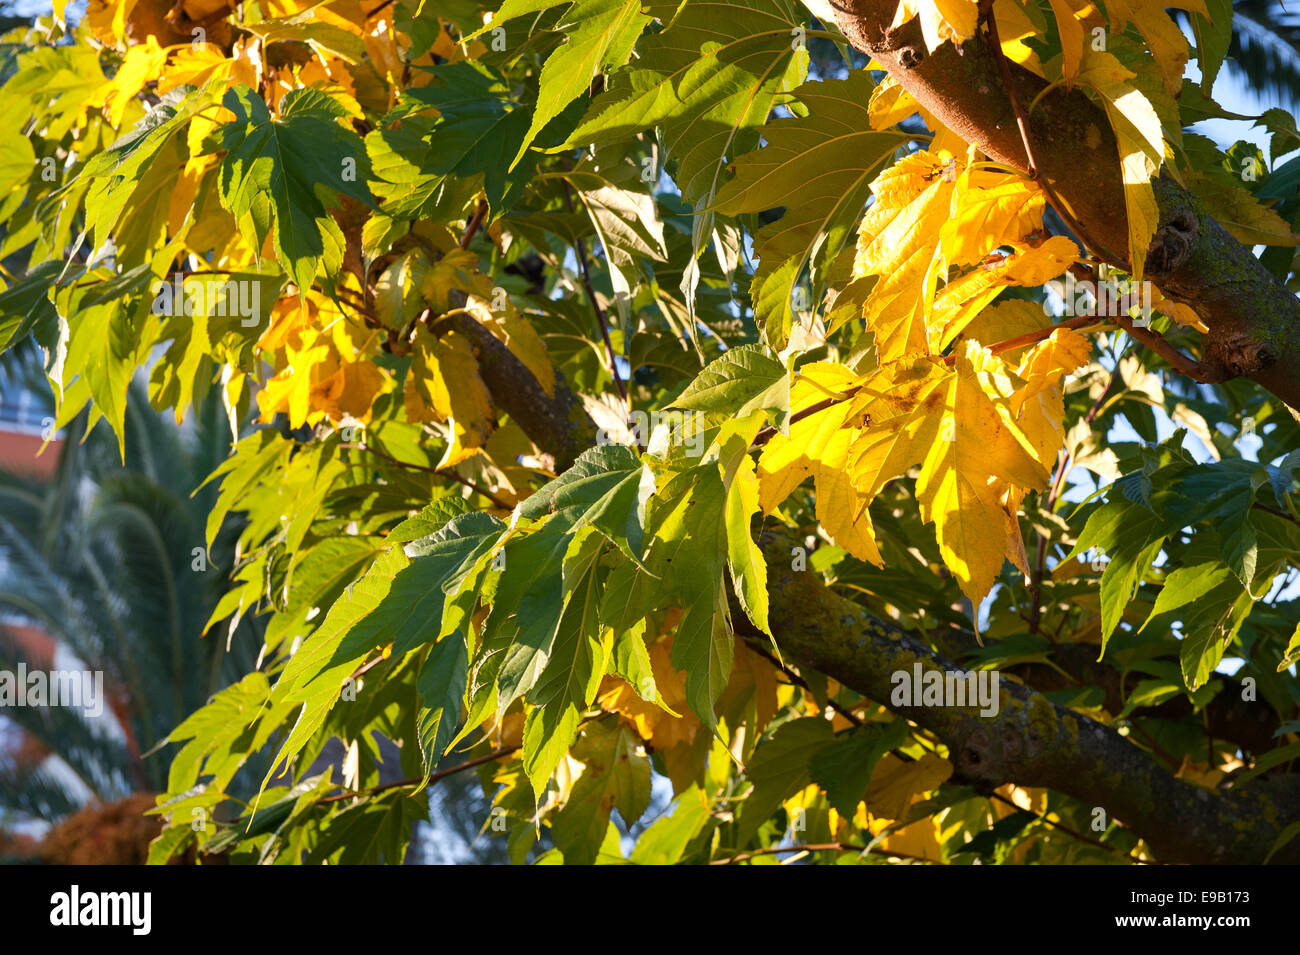 Autumn branch with yellow and green leaves Stock Photo